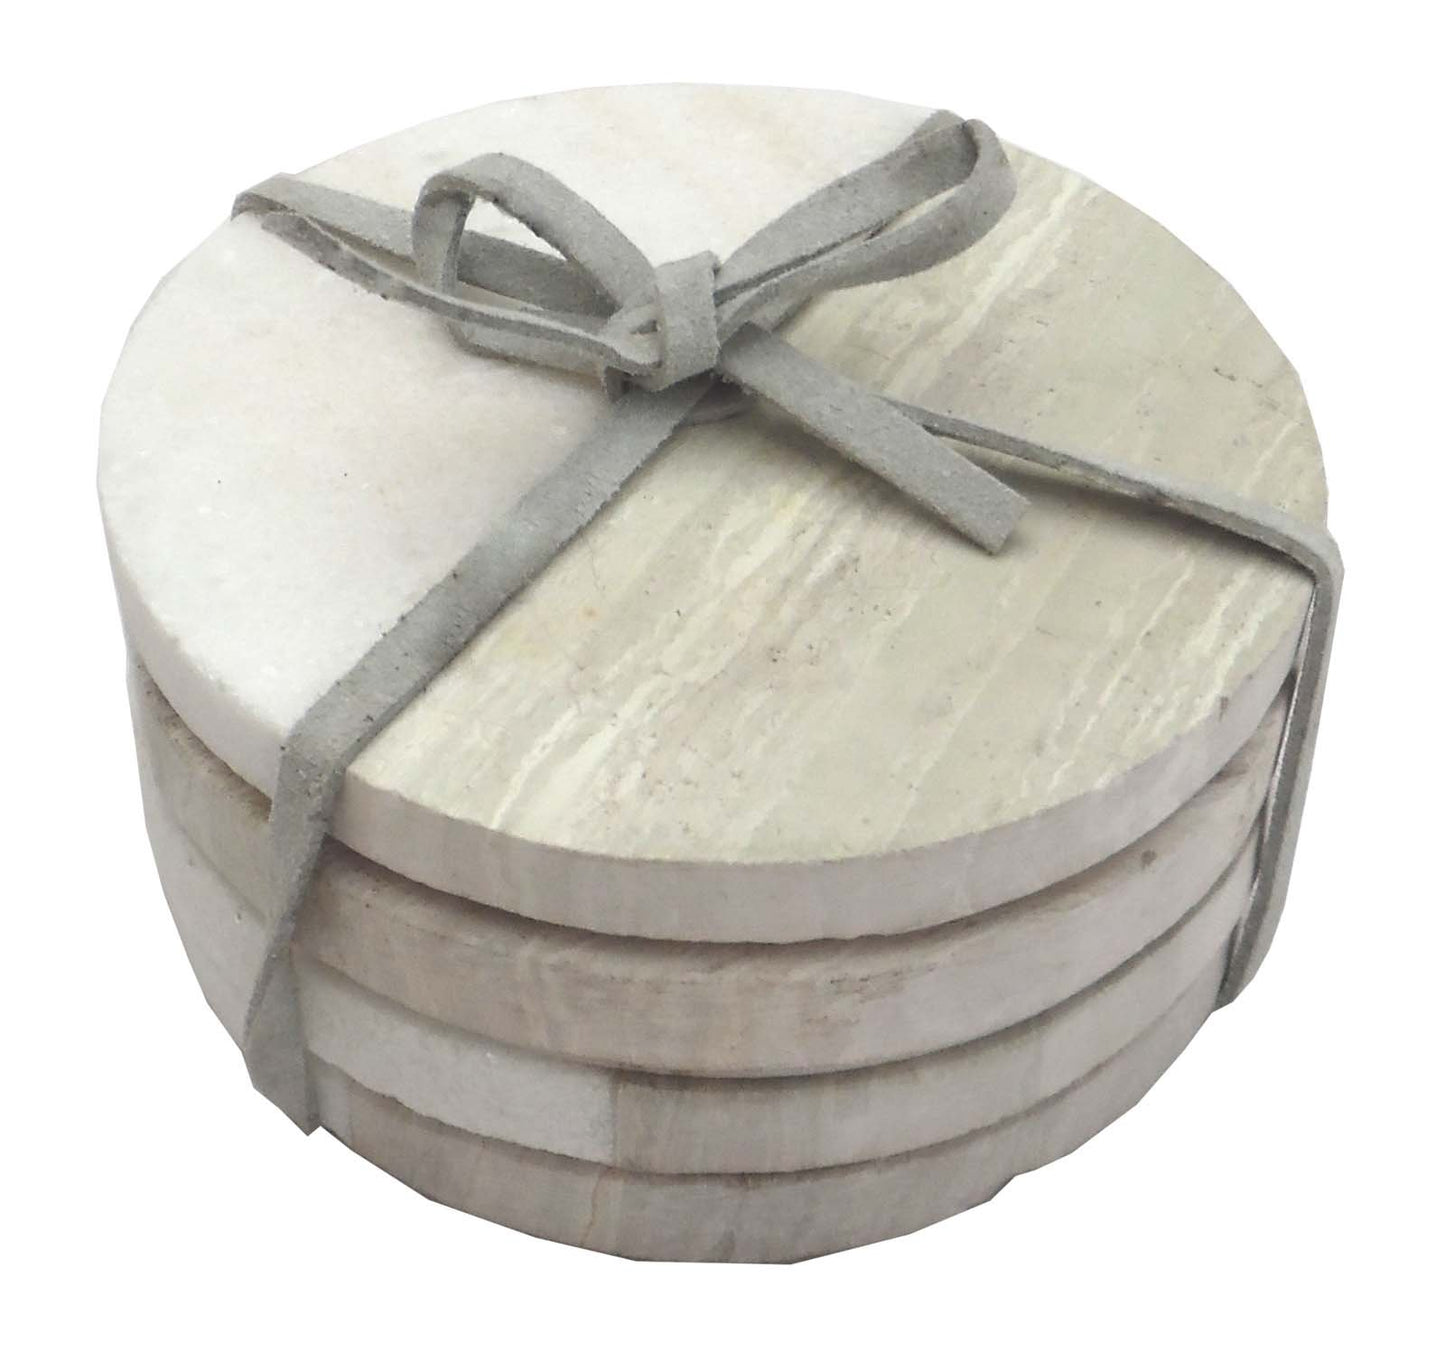 Set of 4 Wood Effect Marble Coasters - Round